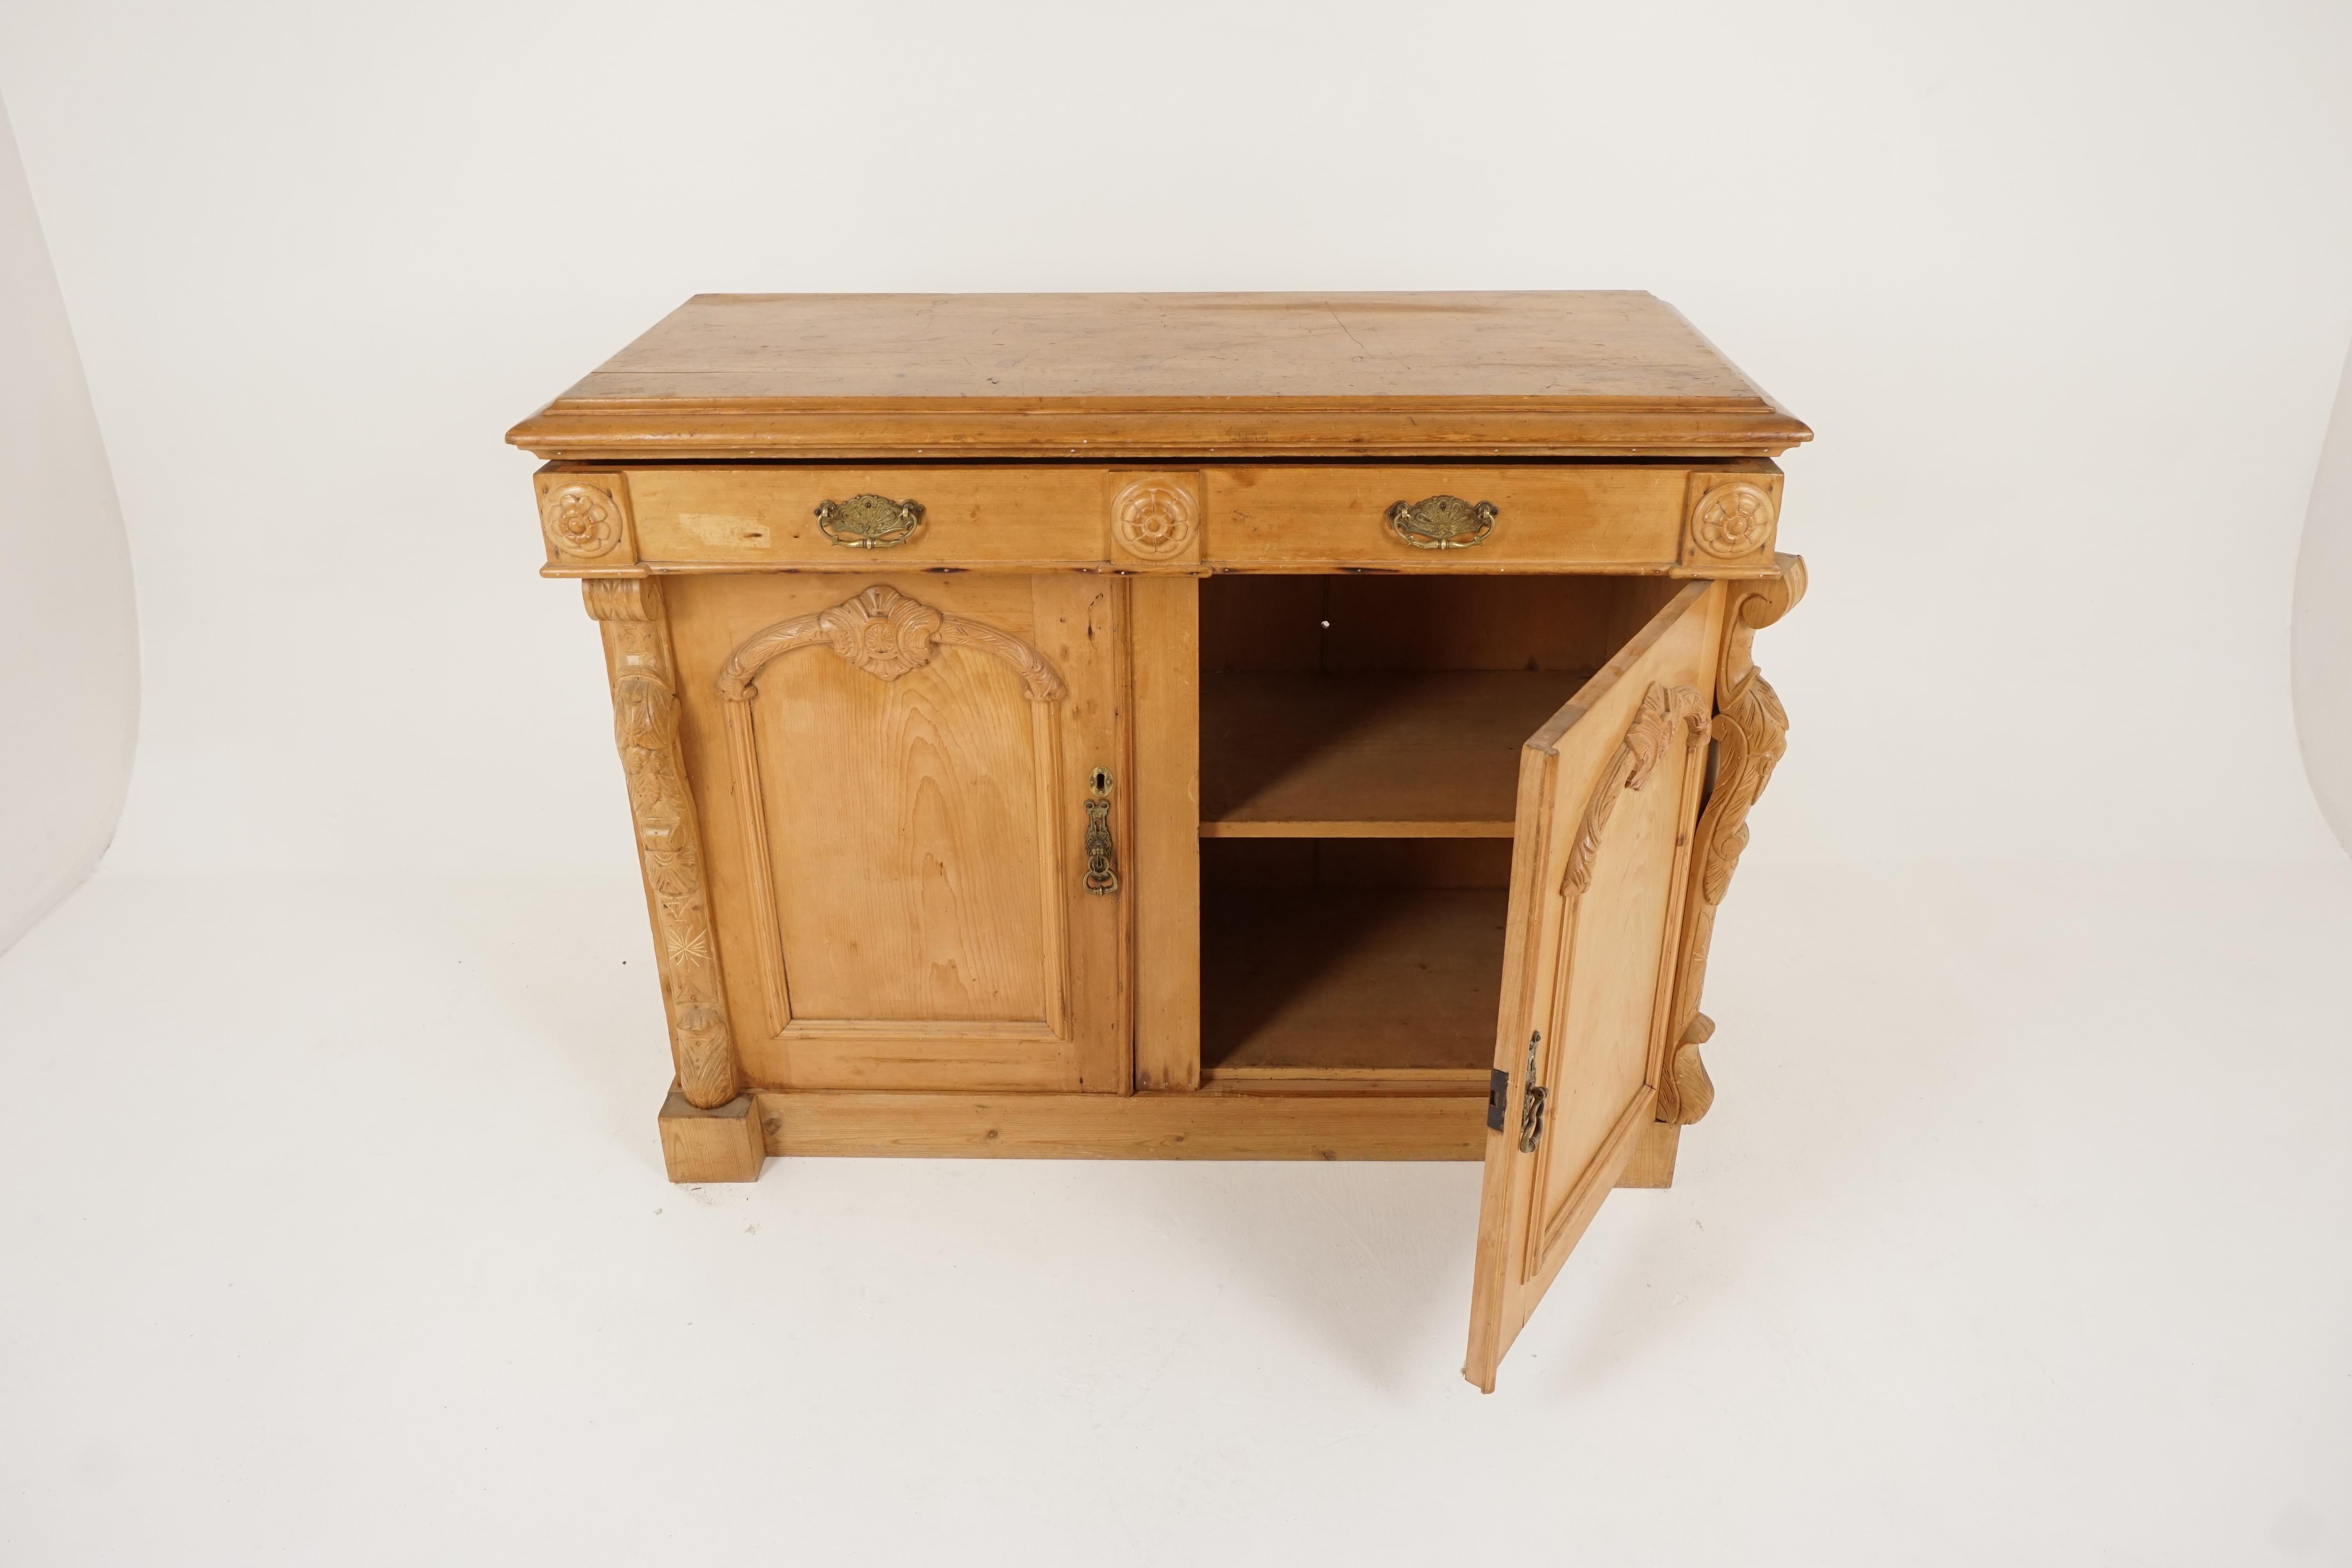 Antique Scottish pine farmhouse kitchen sideboard, cupboard, Scotland, 1880

Scotland, 1880
Pine farmhouse kitchen sideboard, cupboard solid pine
Original finish
Rectangular top with wide moulded edge
Single full length drawer underneath
Three